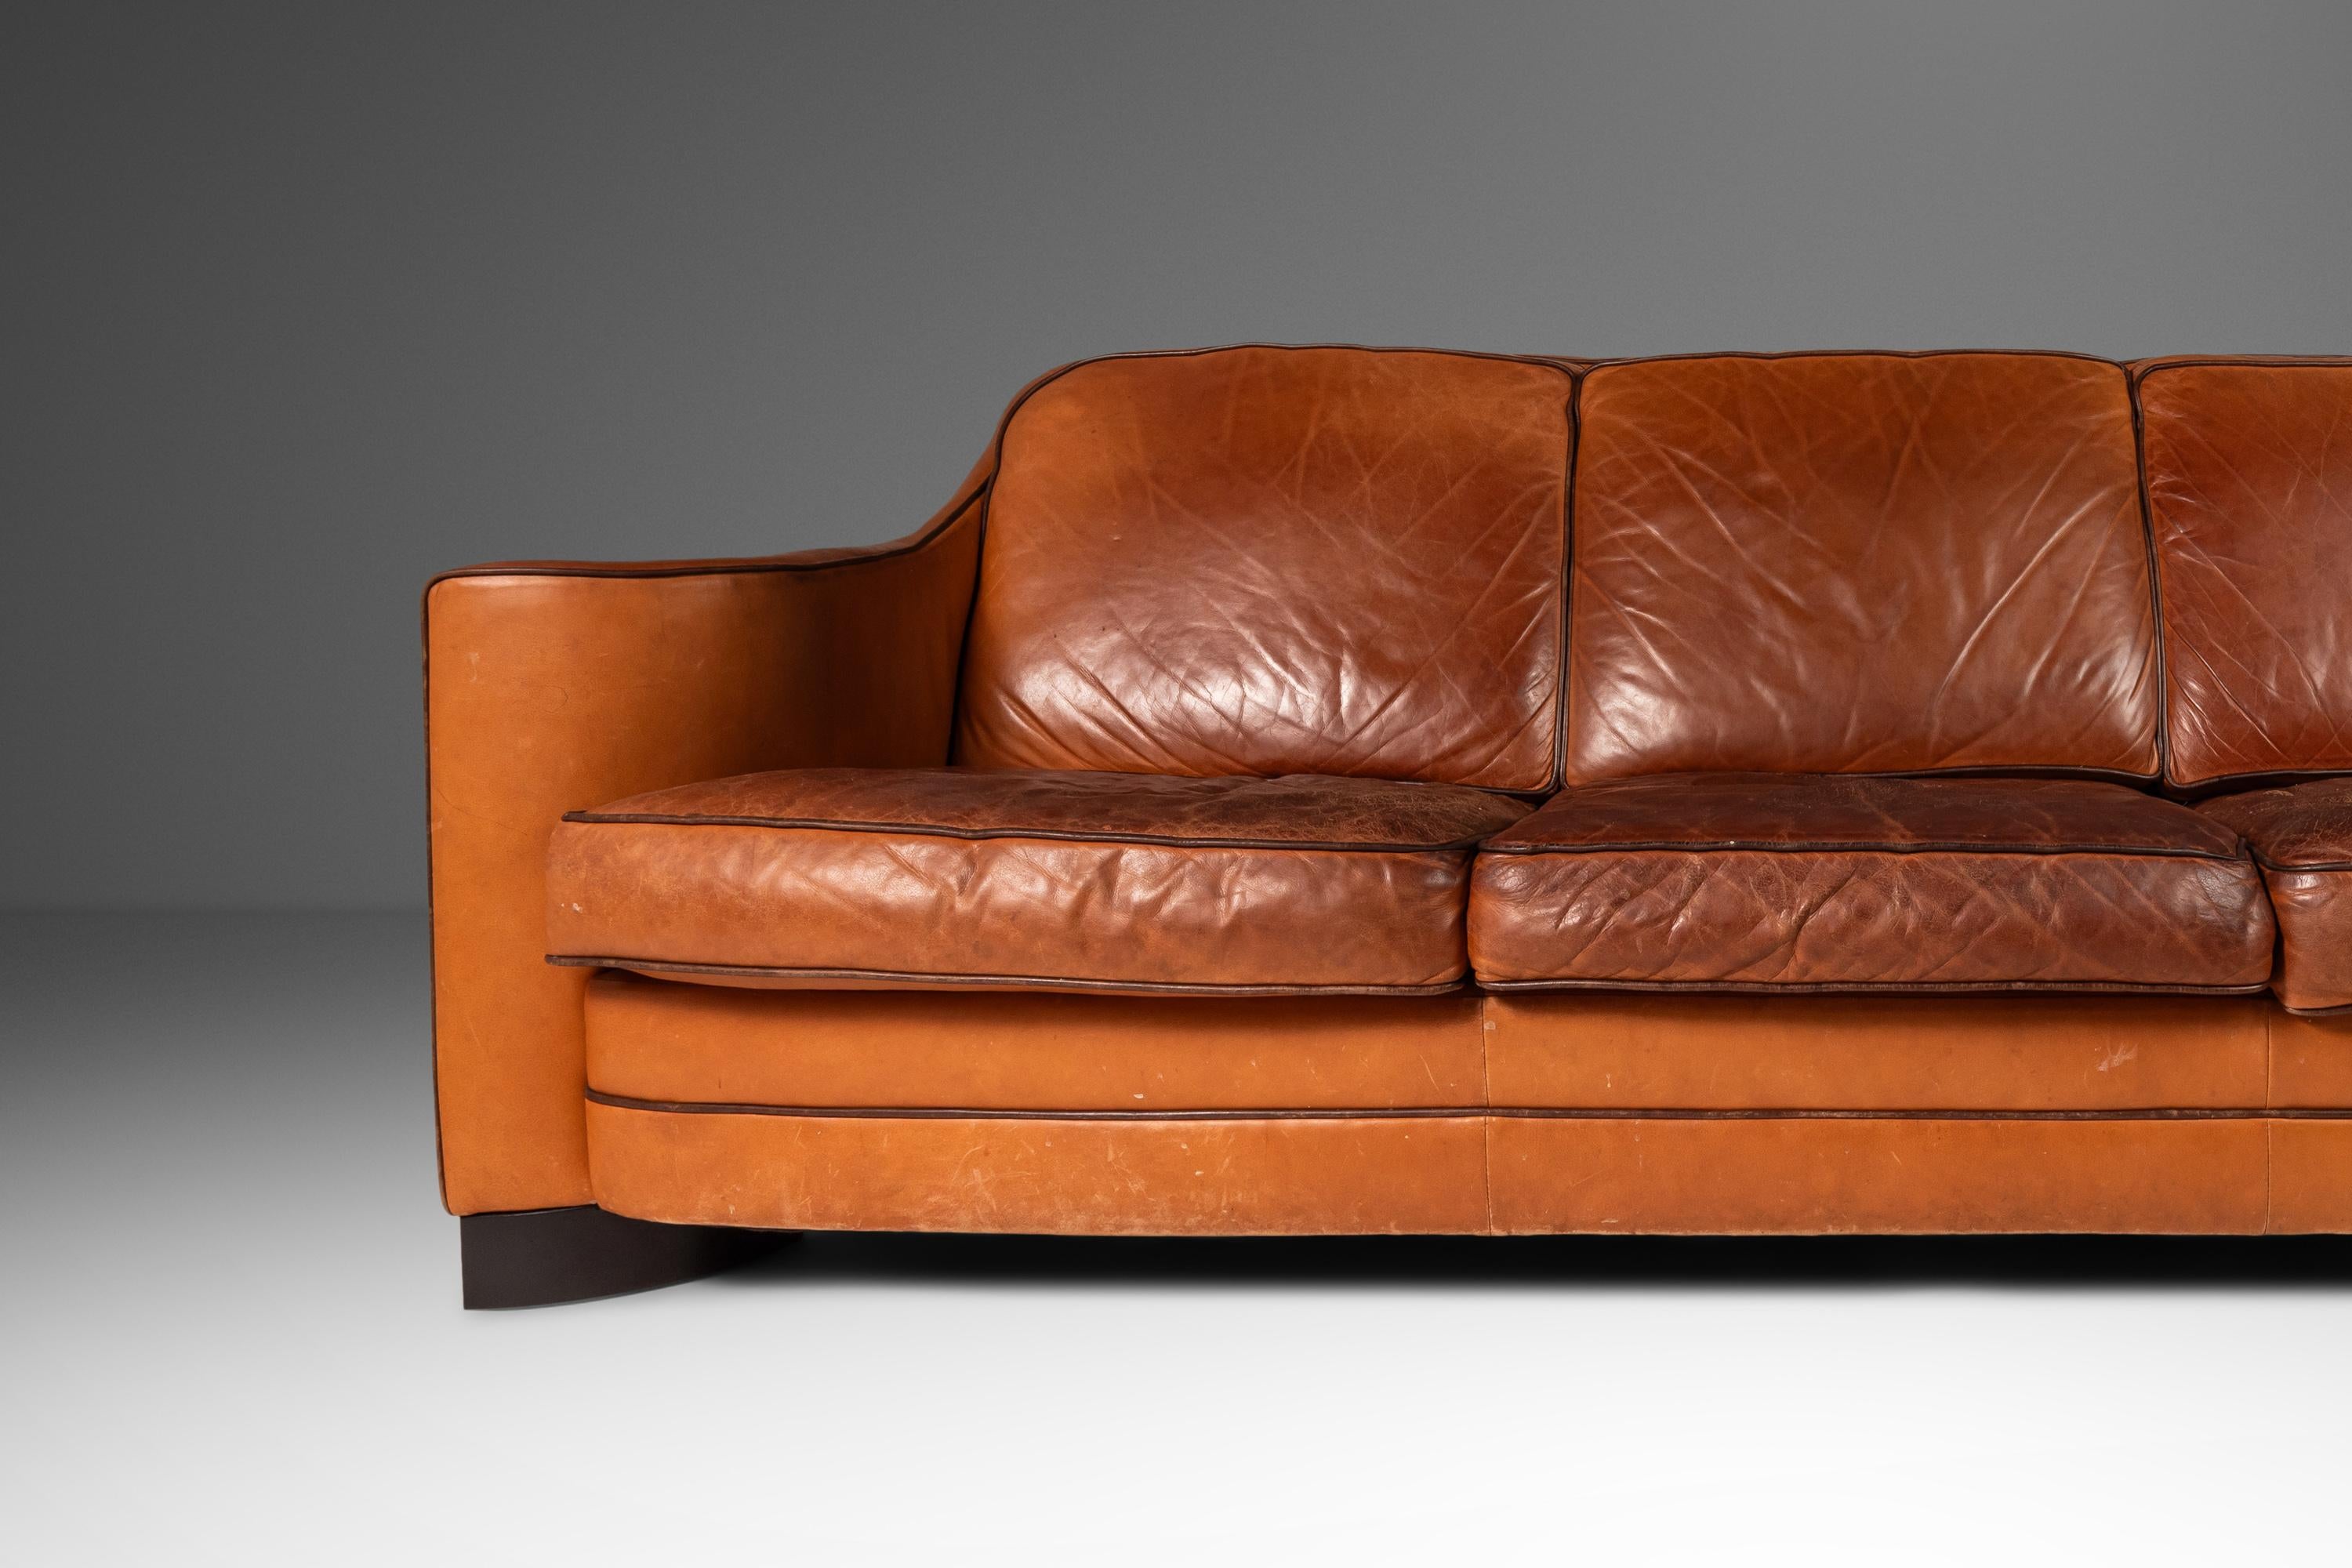 Art Deco Style Three-Seater Sofa with Sculptural Arms in Patinaed Leather, 1970s For Sale 3